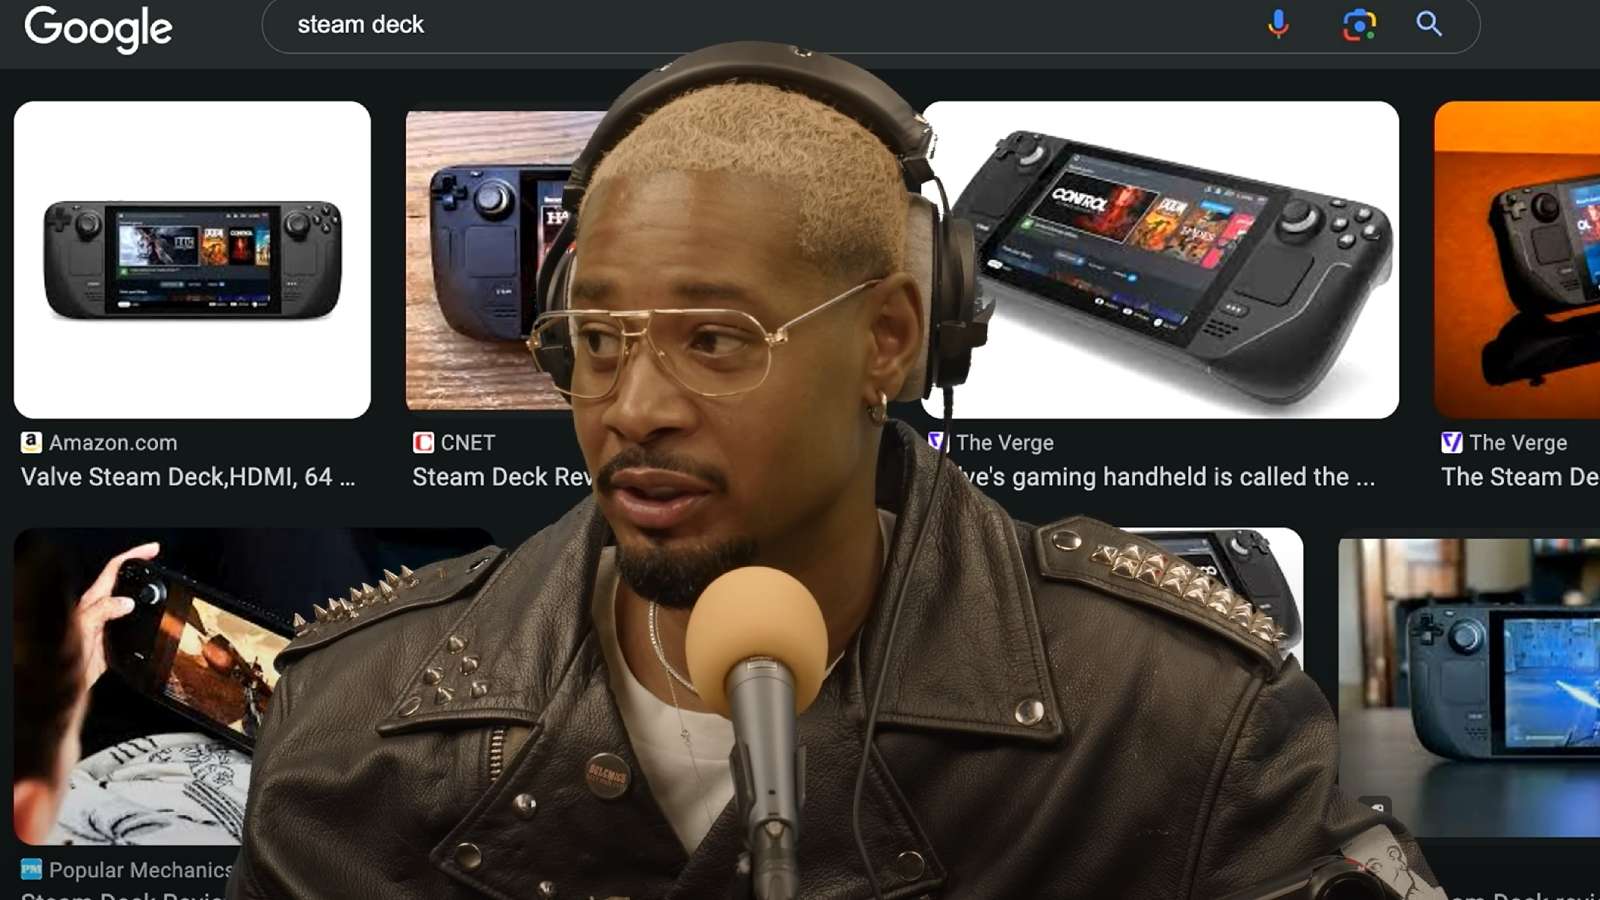 Danny Brown on google search results background of Steam Decks